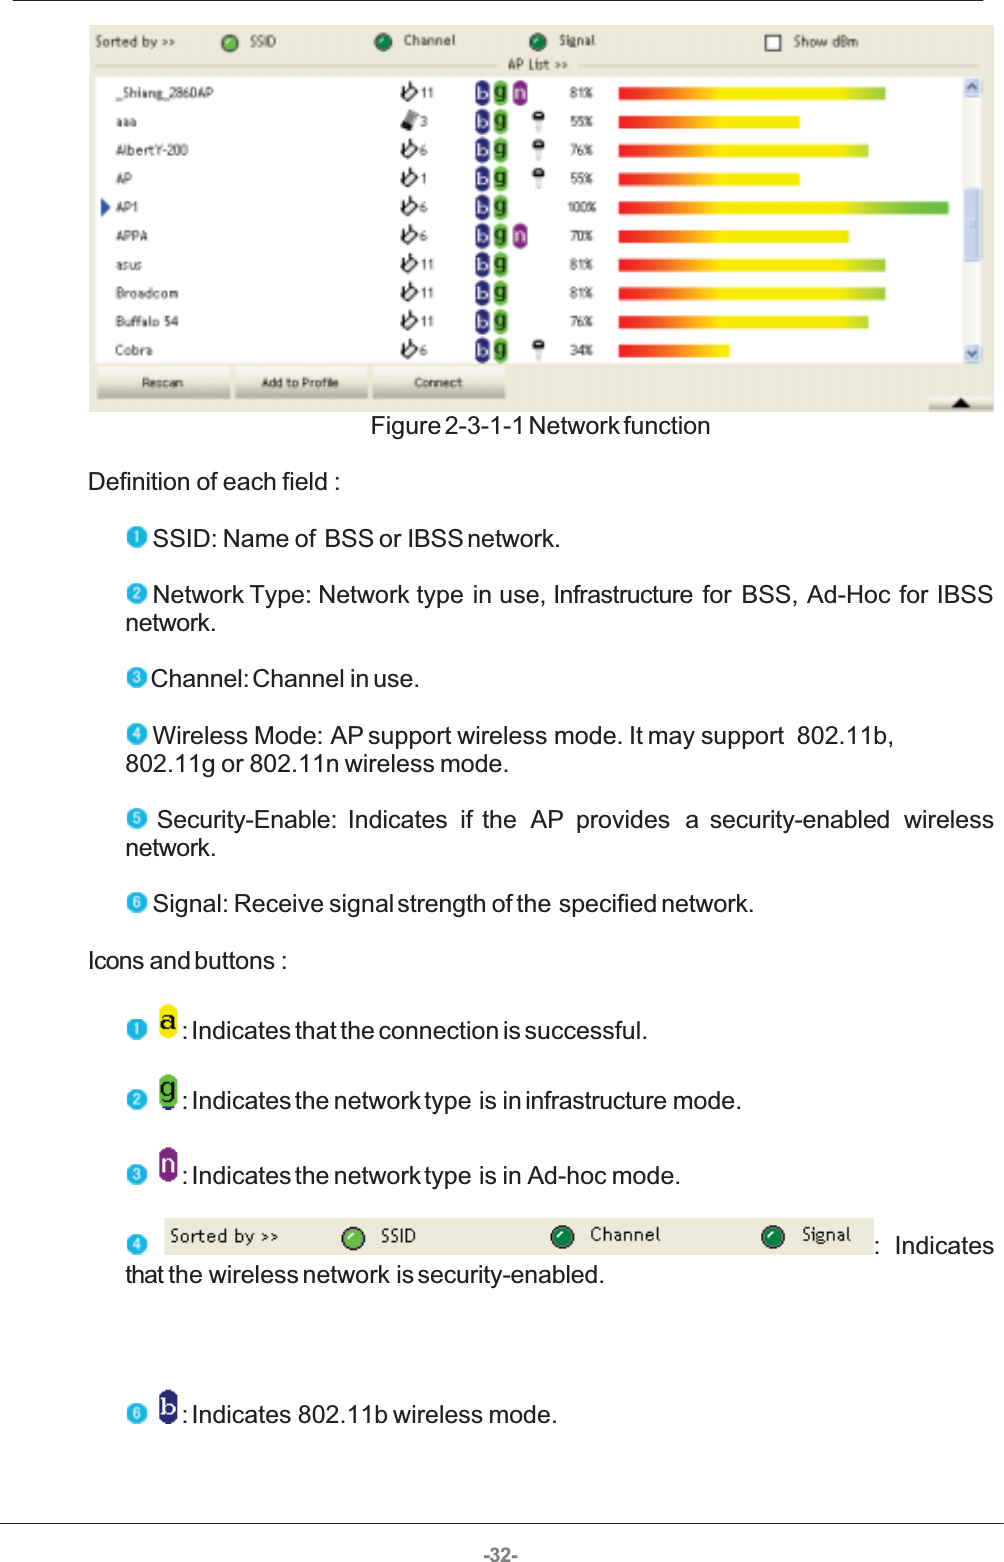 -32-Figure 2-3-1-1 Network function Definition of each field :  SSID: Name of  BSS or IBSS network.  Network Type: Network  type  in  use,  Infrastructure  for  BSS,  Ad-Hoc  for IBSSnetwork.  Channel: Channel in use.  Wireless Mode: AP support wireless mode. It may support  802.11b,802.11g or 802.11n wireless mode.  Security-Enable:  Indicates  if  the  AP  provides  a  security-enabled  wirelessnetwork.  Signal: Receive signal strength of the specified network. Icons and buttons :  : Indicates that the connection is successful.  : Indicates the network type  is in infrastructure mode.  : Indicates the network type  is in Ad-hoc mode.  :  Indicatesthat the wireless network is security-enabled.    : Indicates 802.11b wireless mode. 